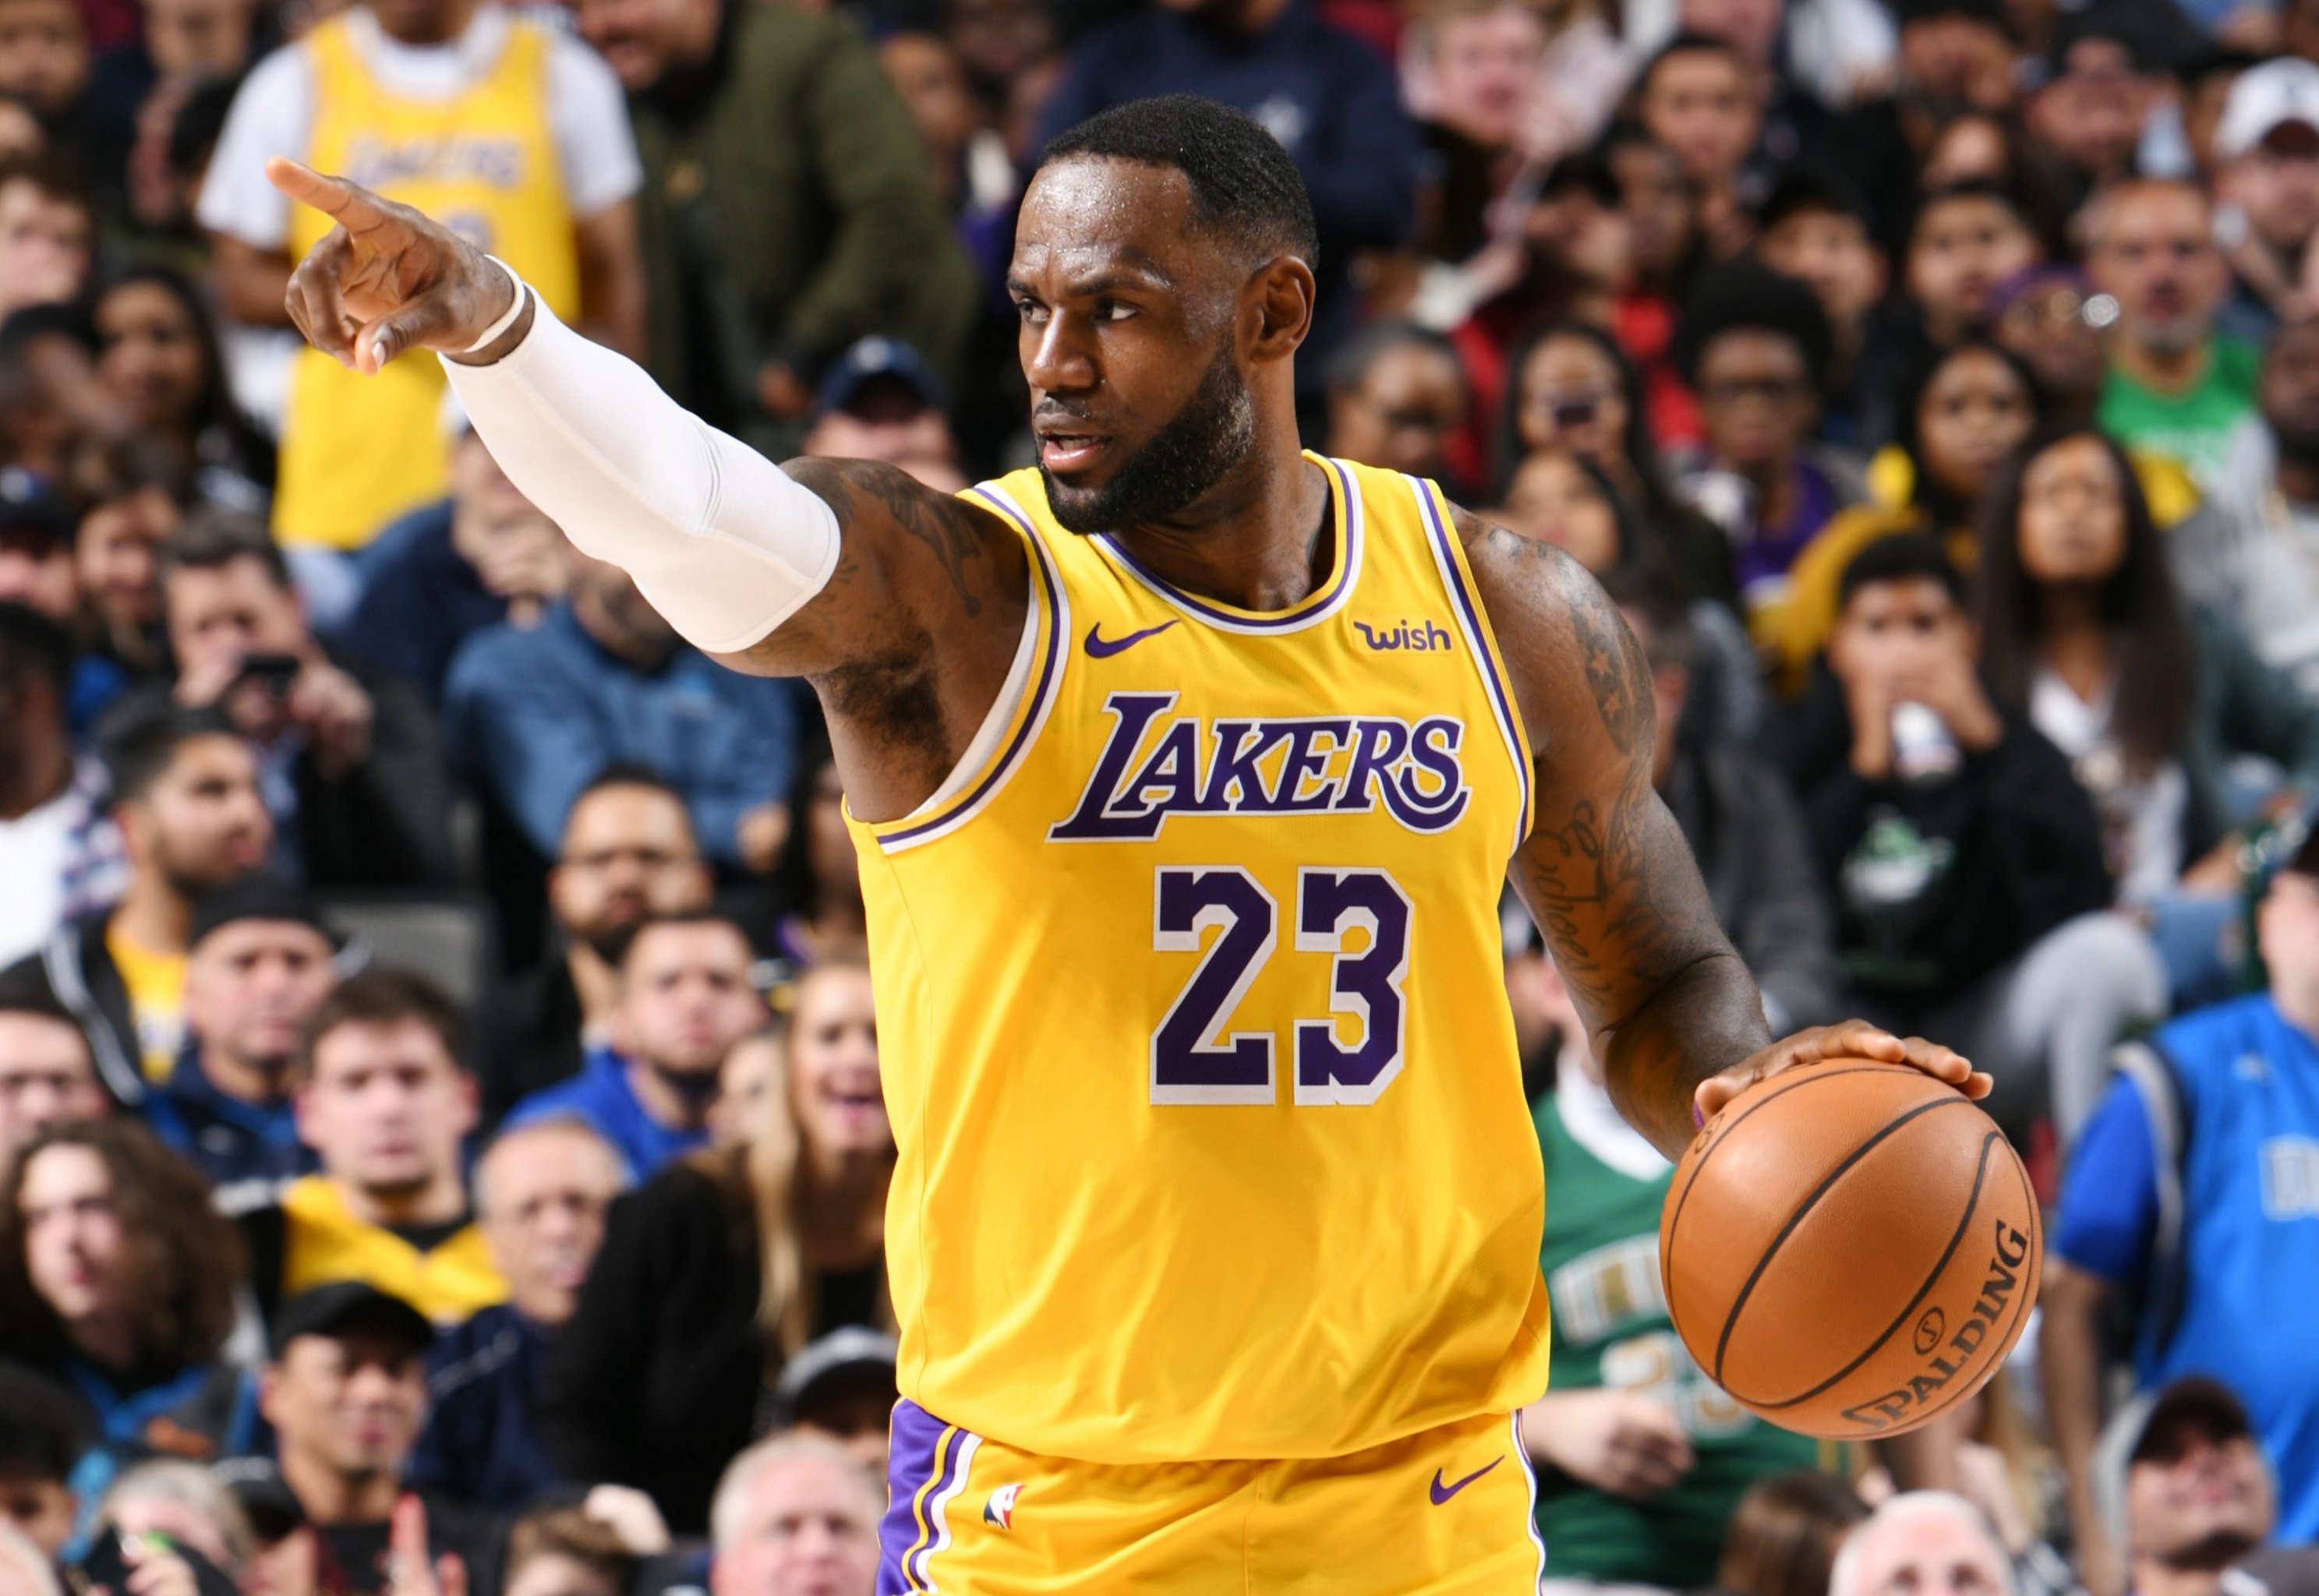 The Lakers' crunch-time struggles continue to cost them in loss to